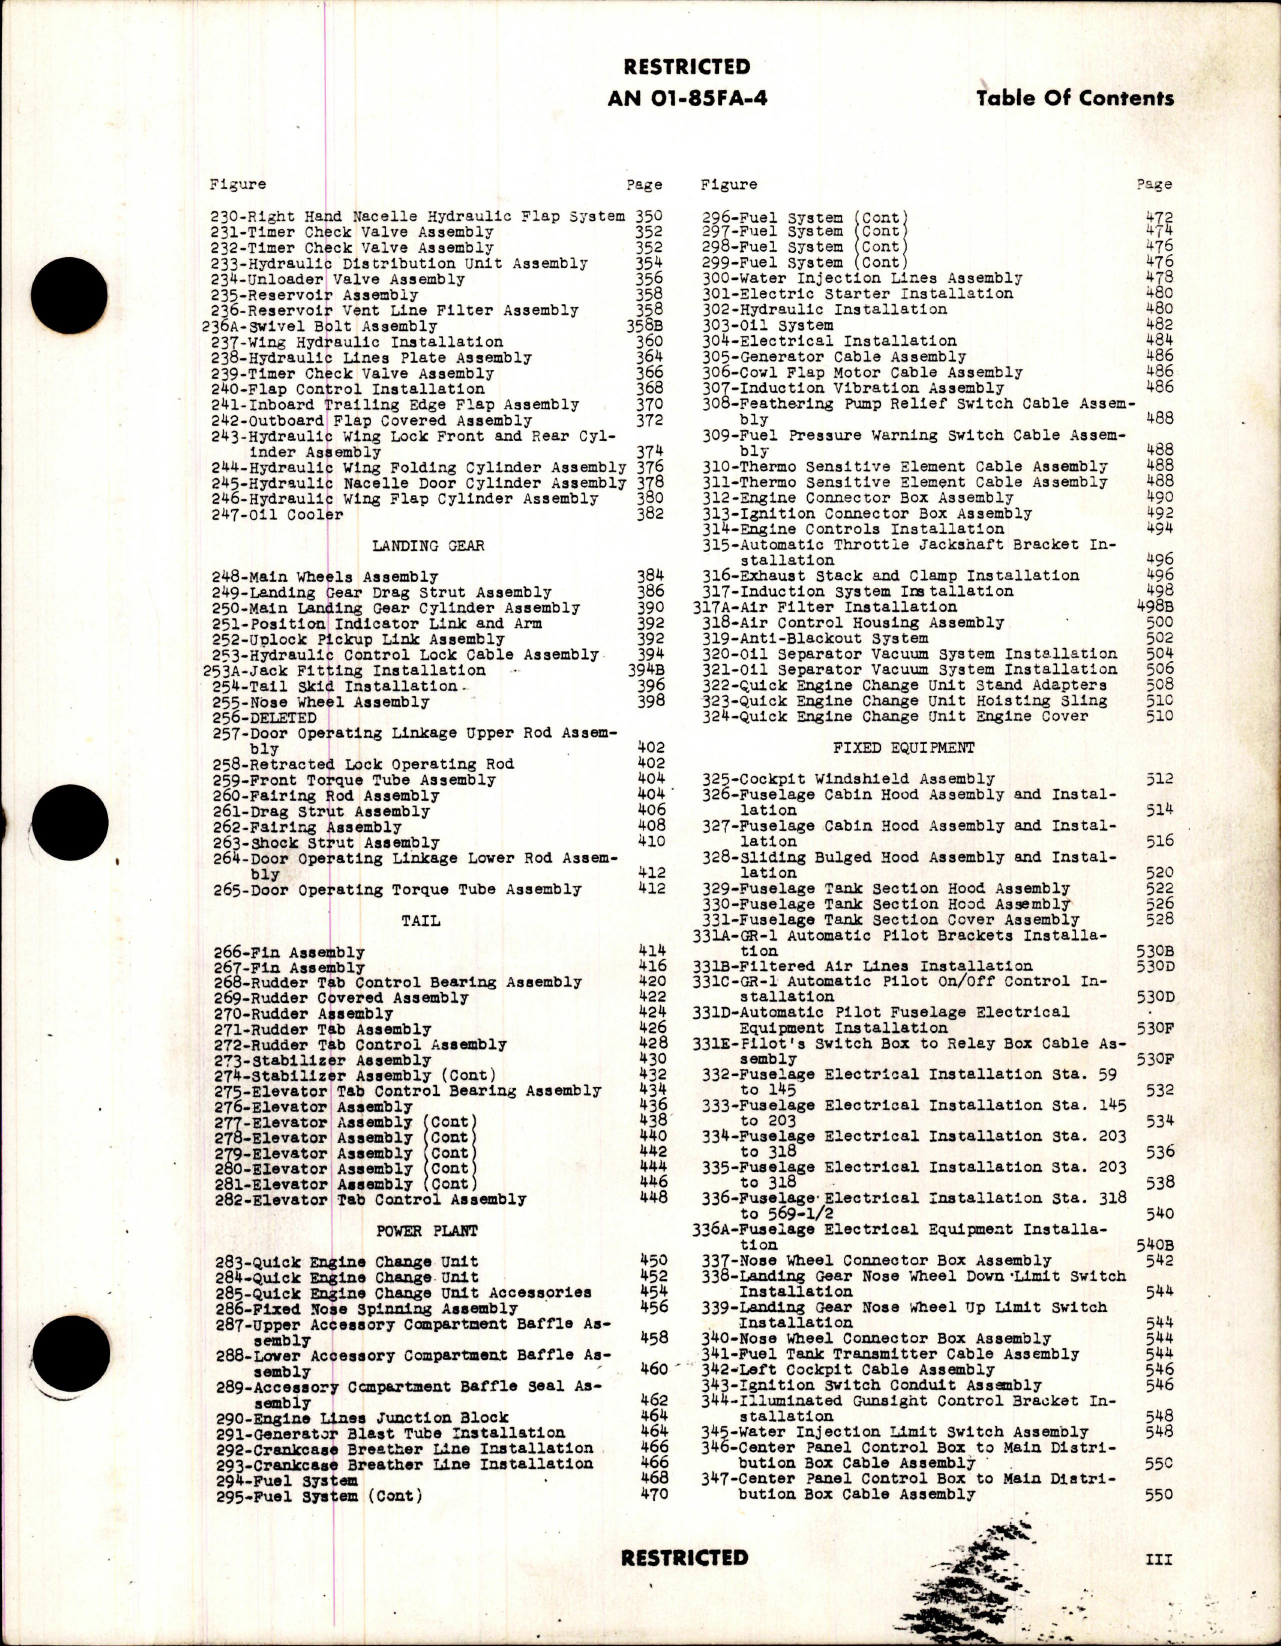 Sample page 5 from AirCorps Library document: Parts Catalog for F7F-1N, F7F-2N, F7F-3, F7F-3N, and F7F-4N